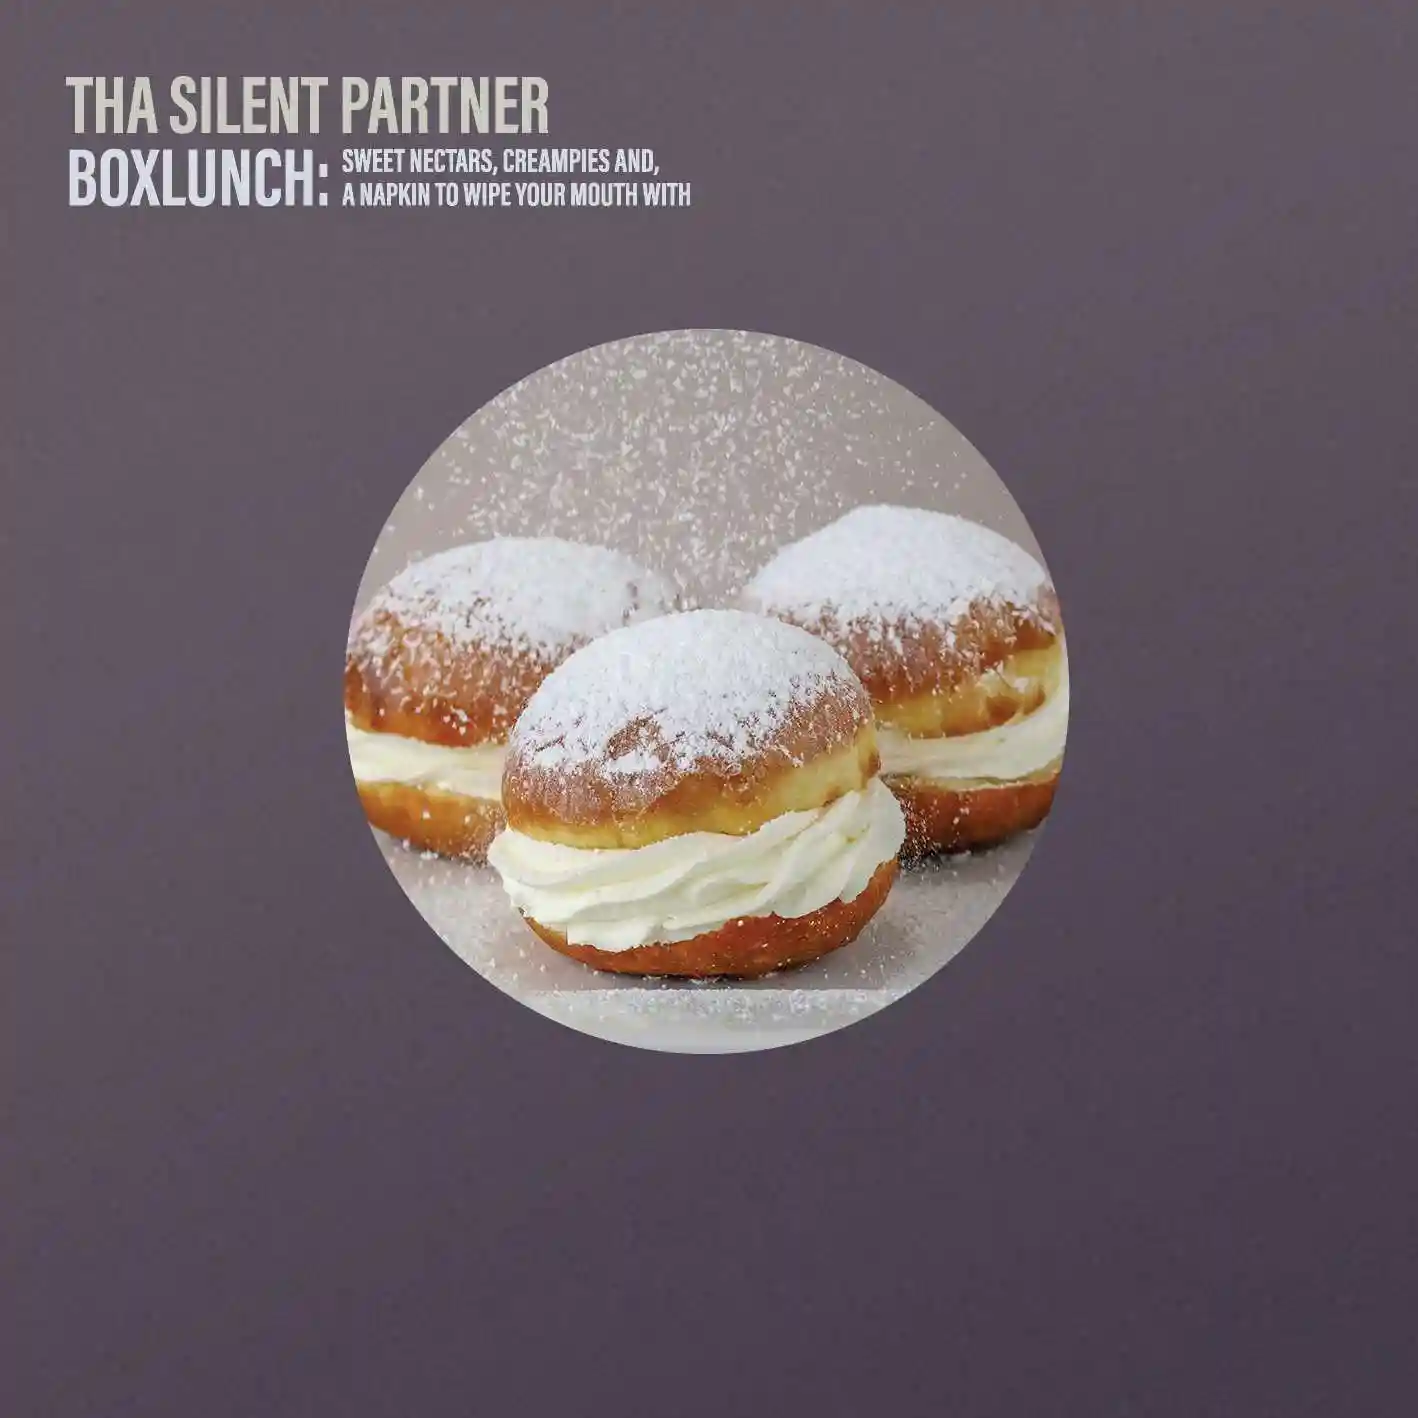 Cover of "BOXLUNCH" by Tha Silent Partner